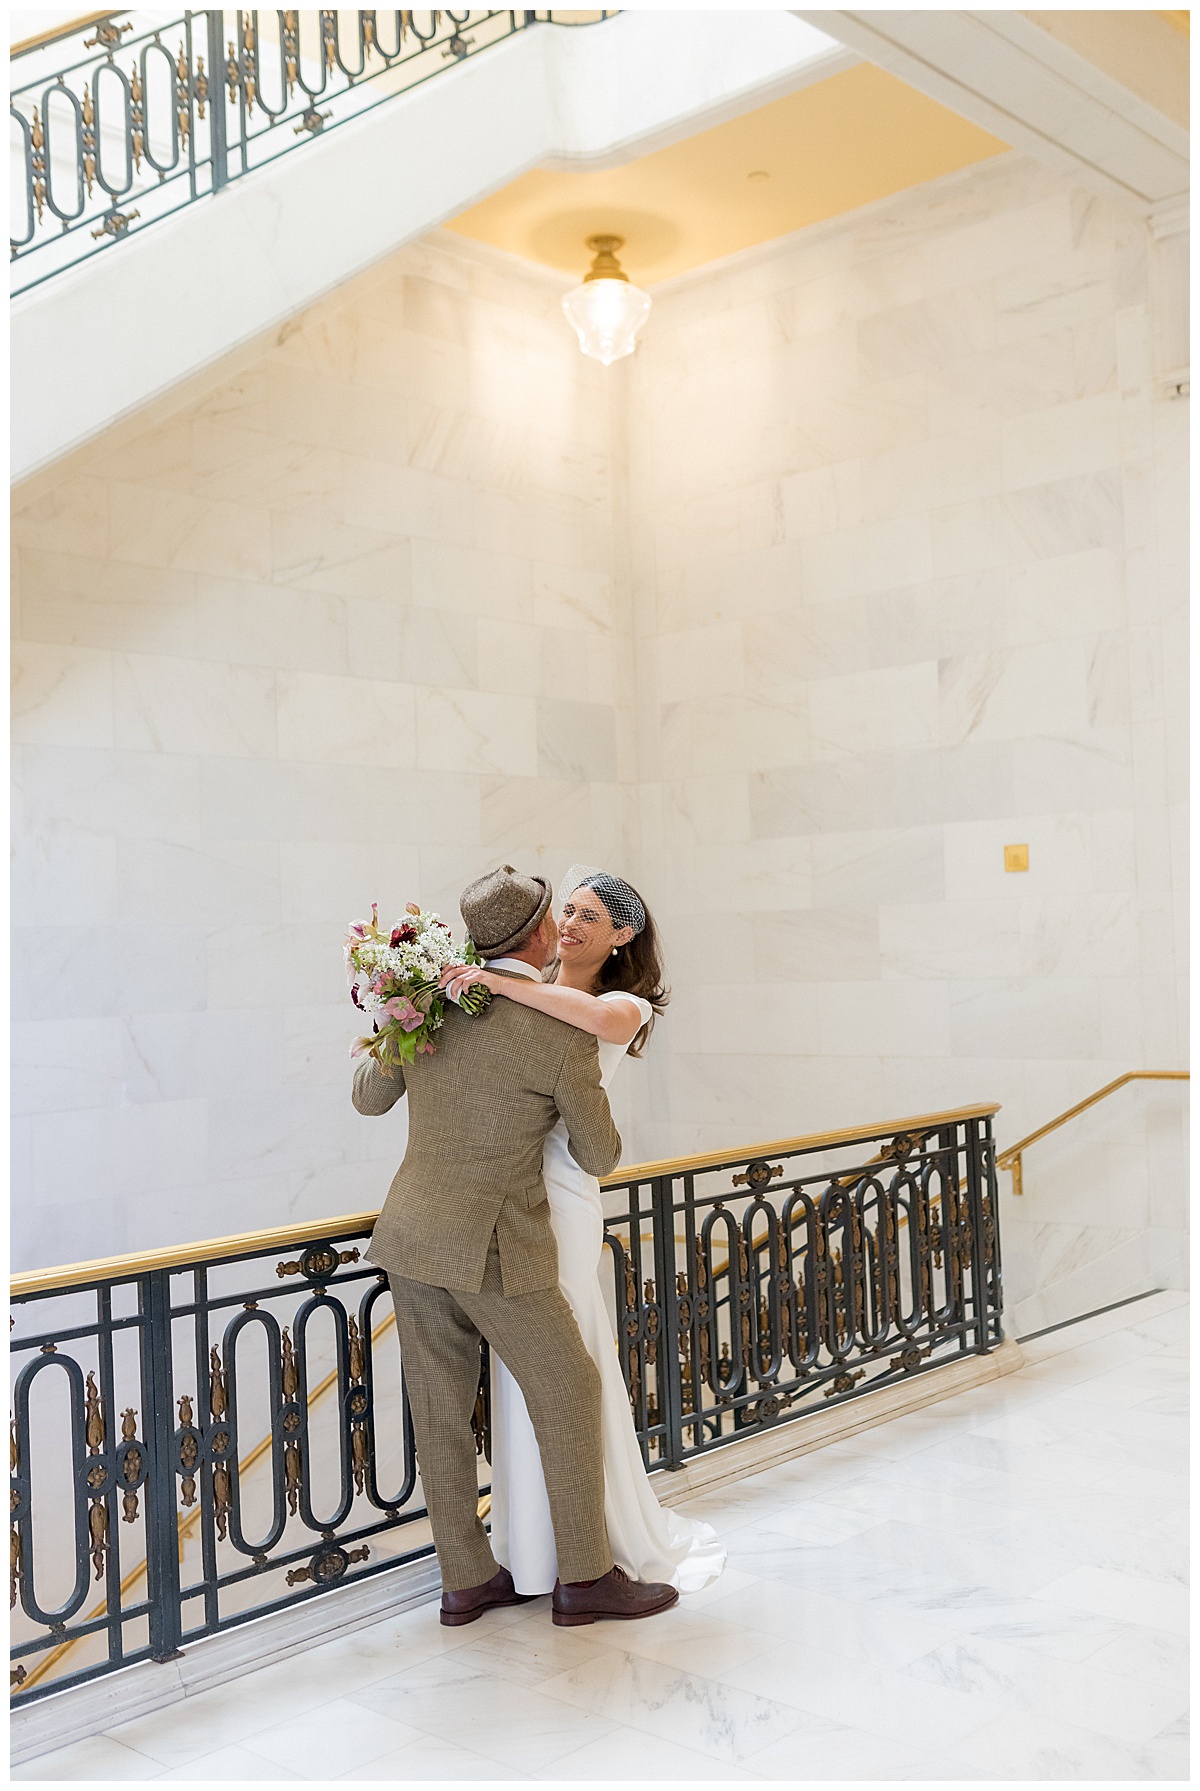 Sanya and Leann's couple's portraits after their charming SF City Hall wedding ceremony